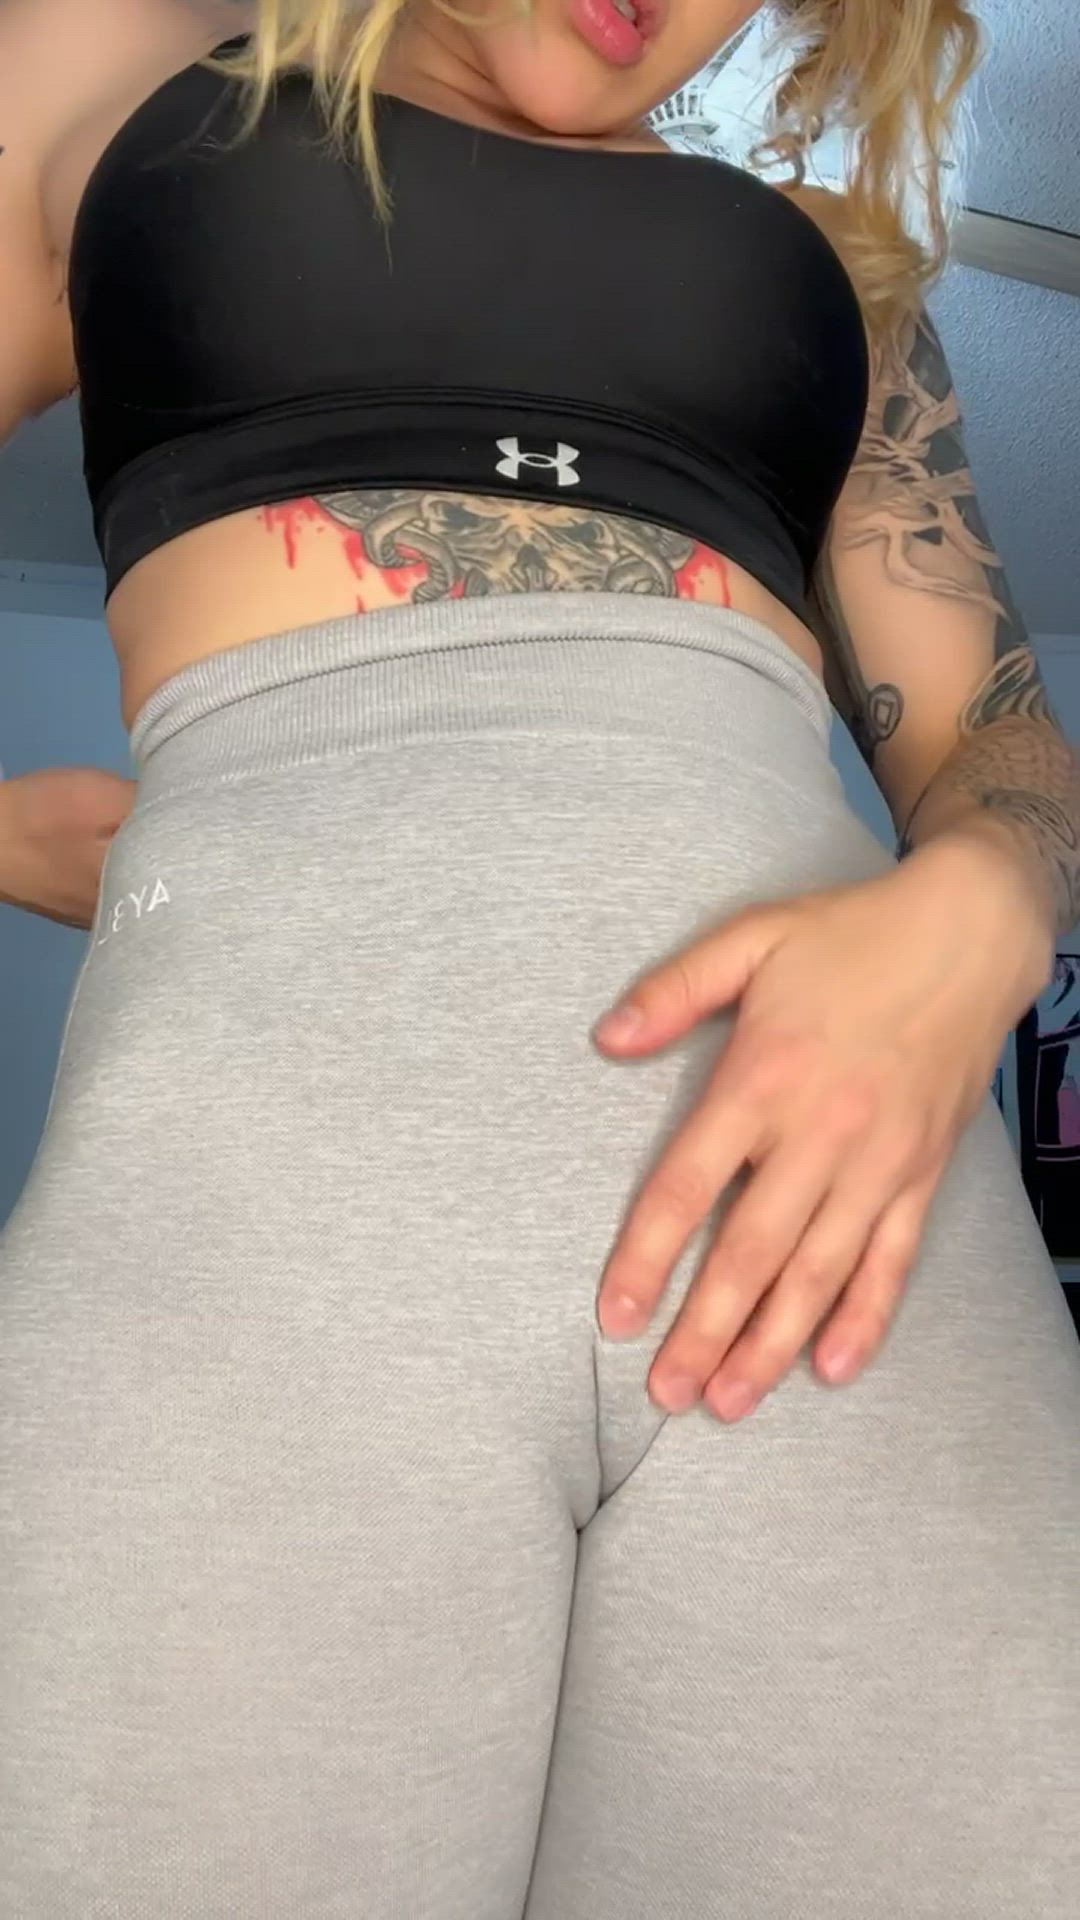 Camel Toe porn video with onlyfans model Muscle Harley 💪 <strong>@theswolegoth</strong>